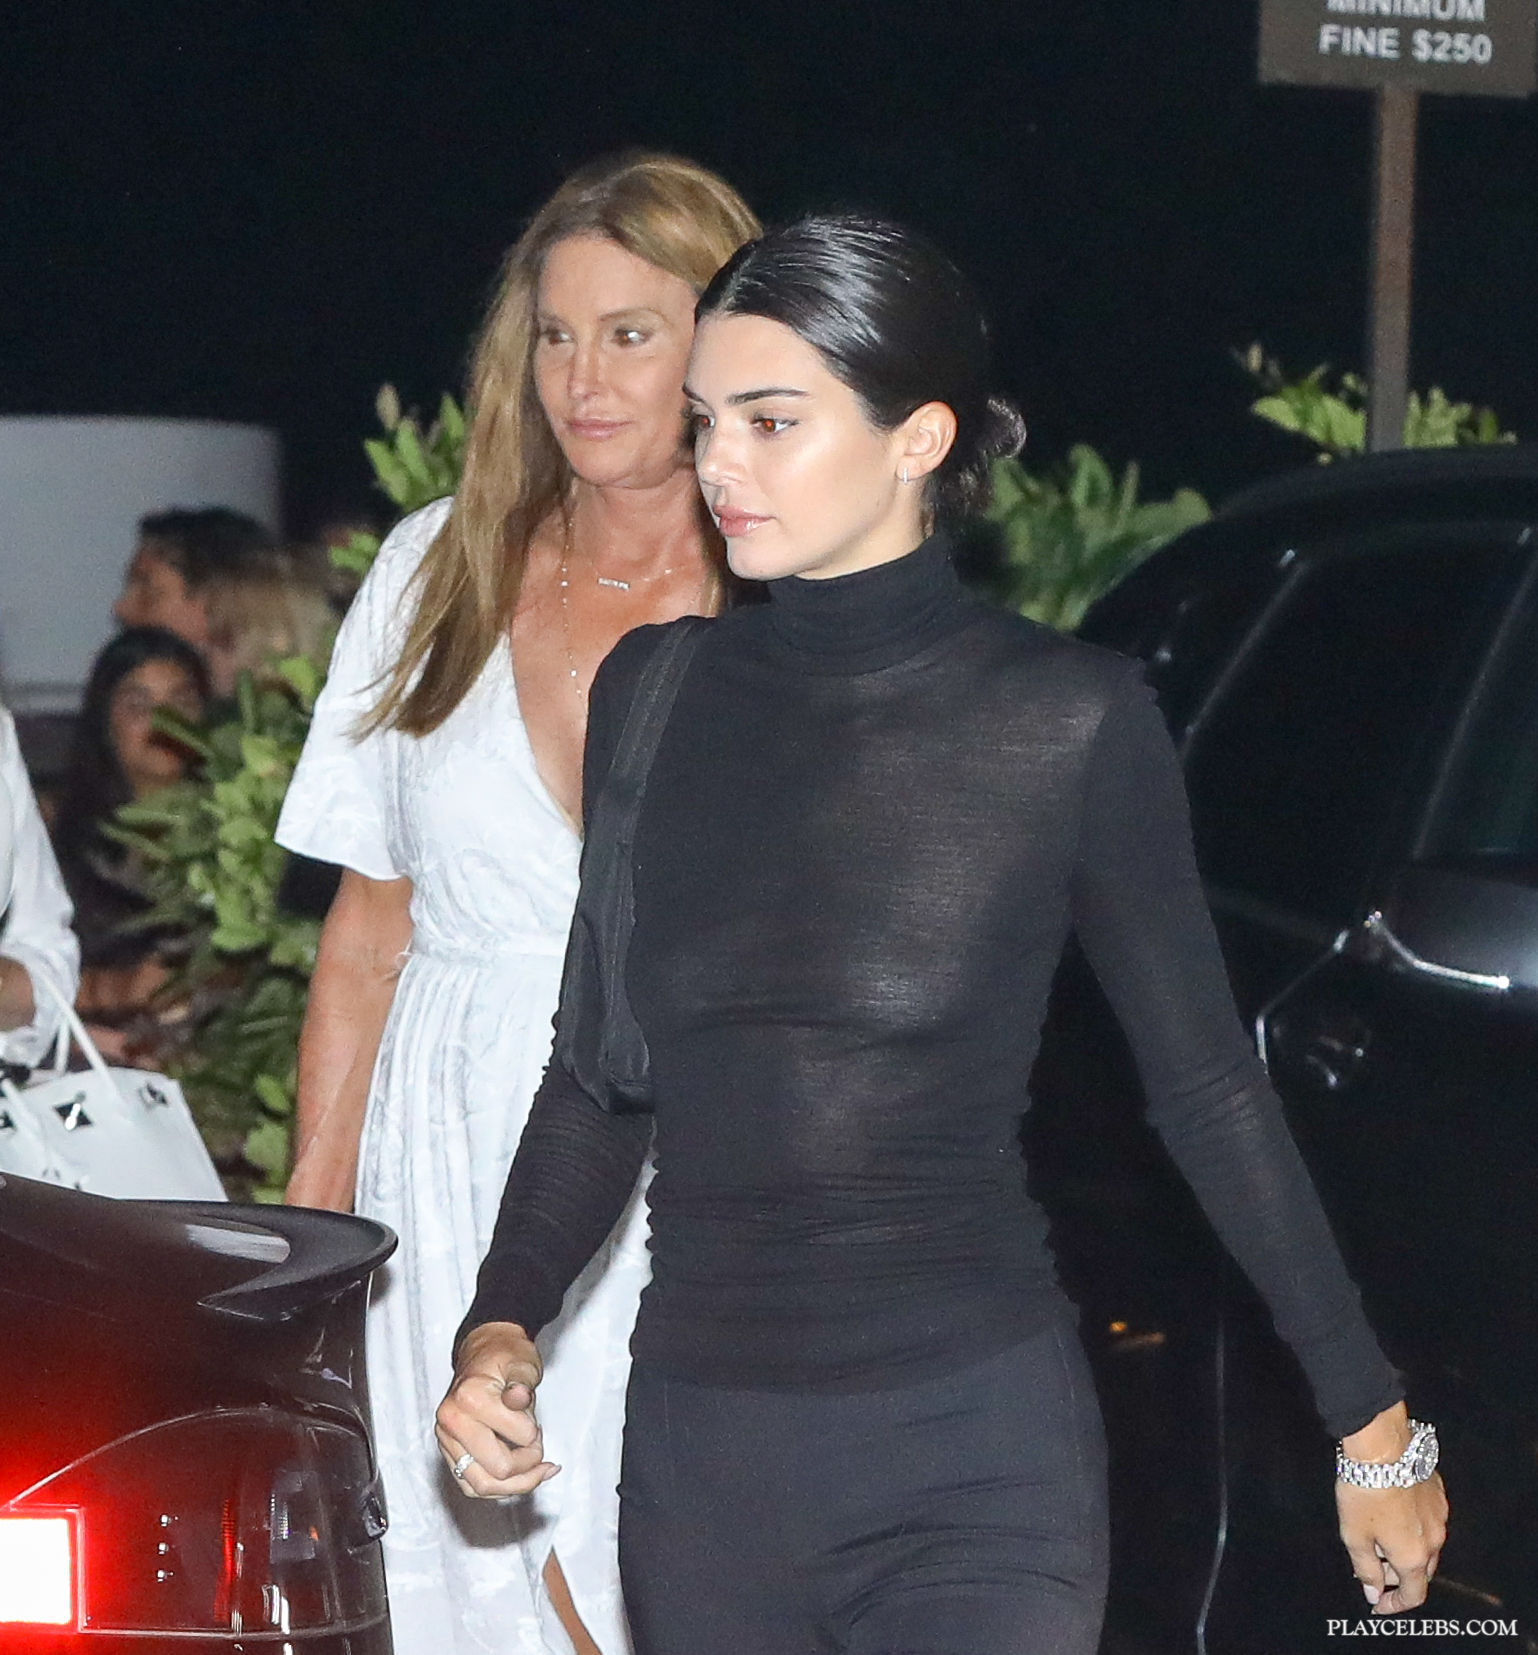 You are currently viewing Kendall Jenner Flashing Her Boobs In See Through